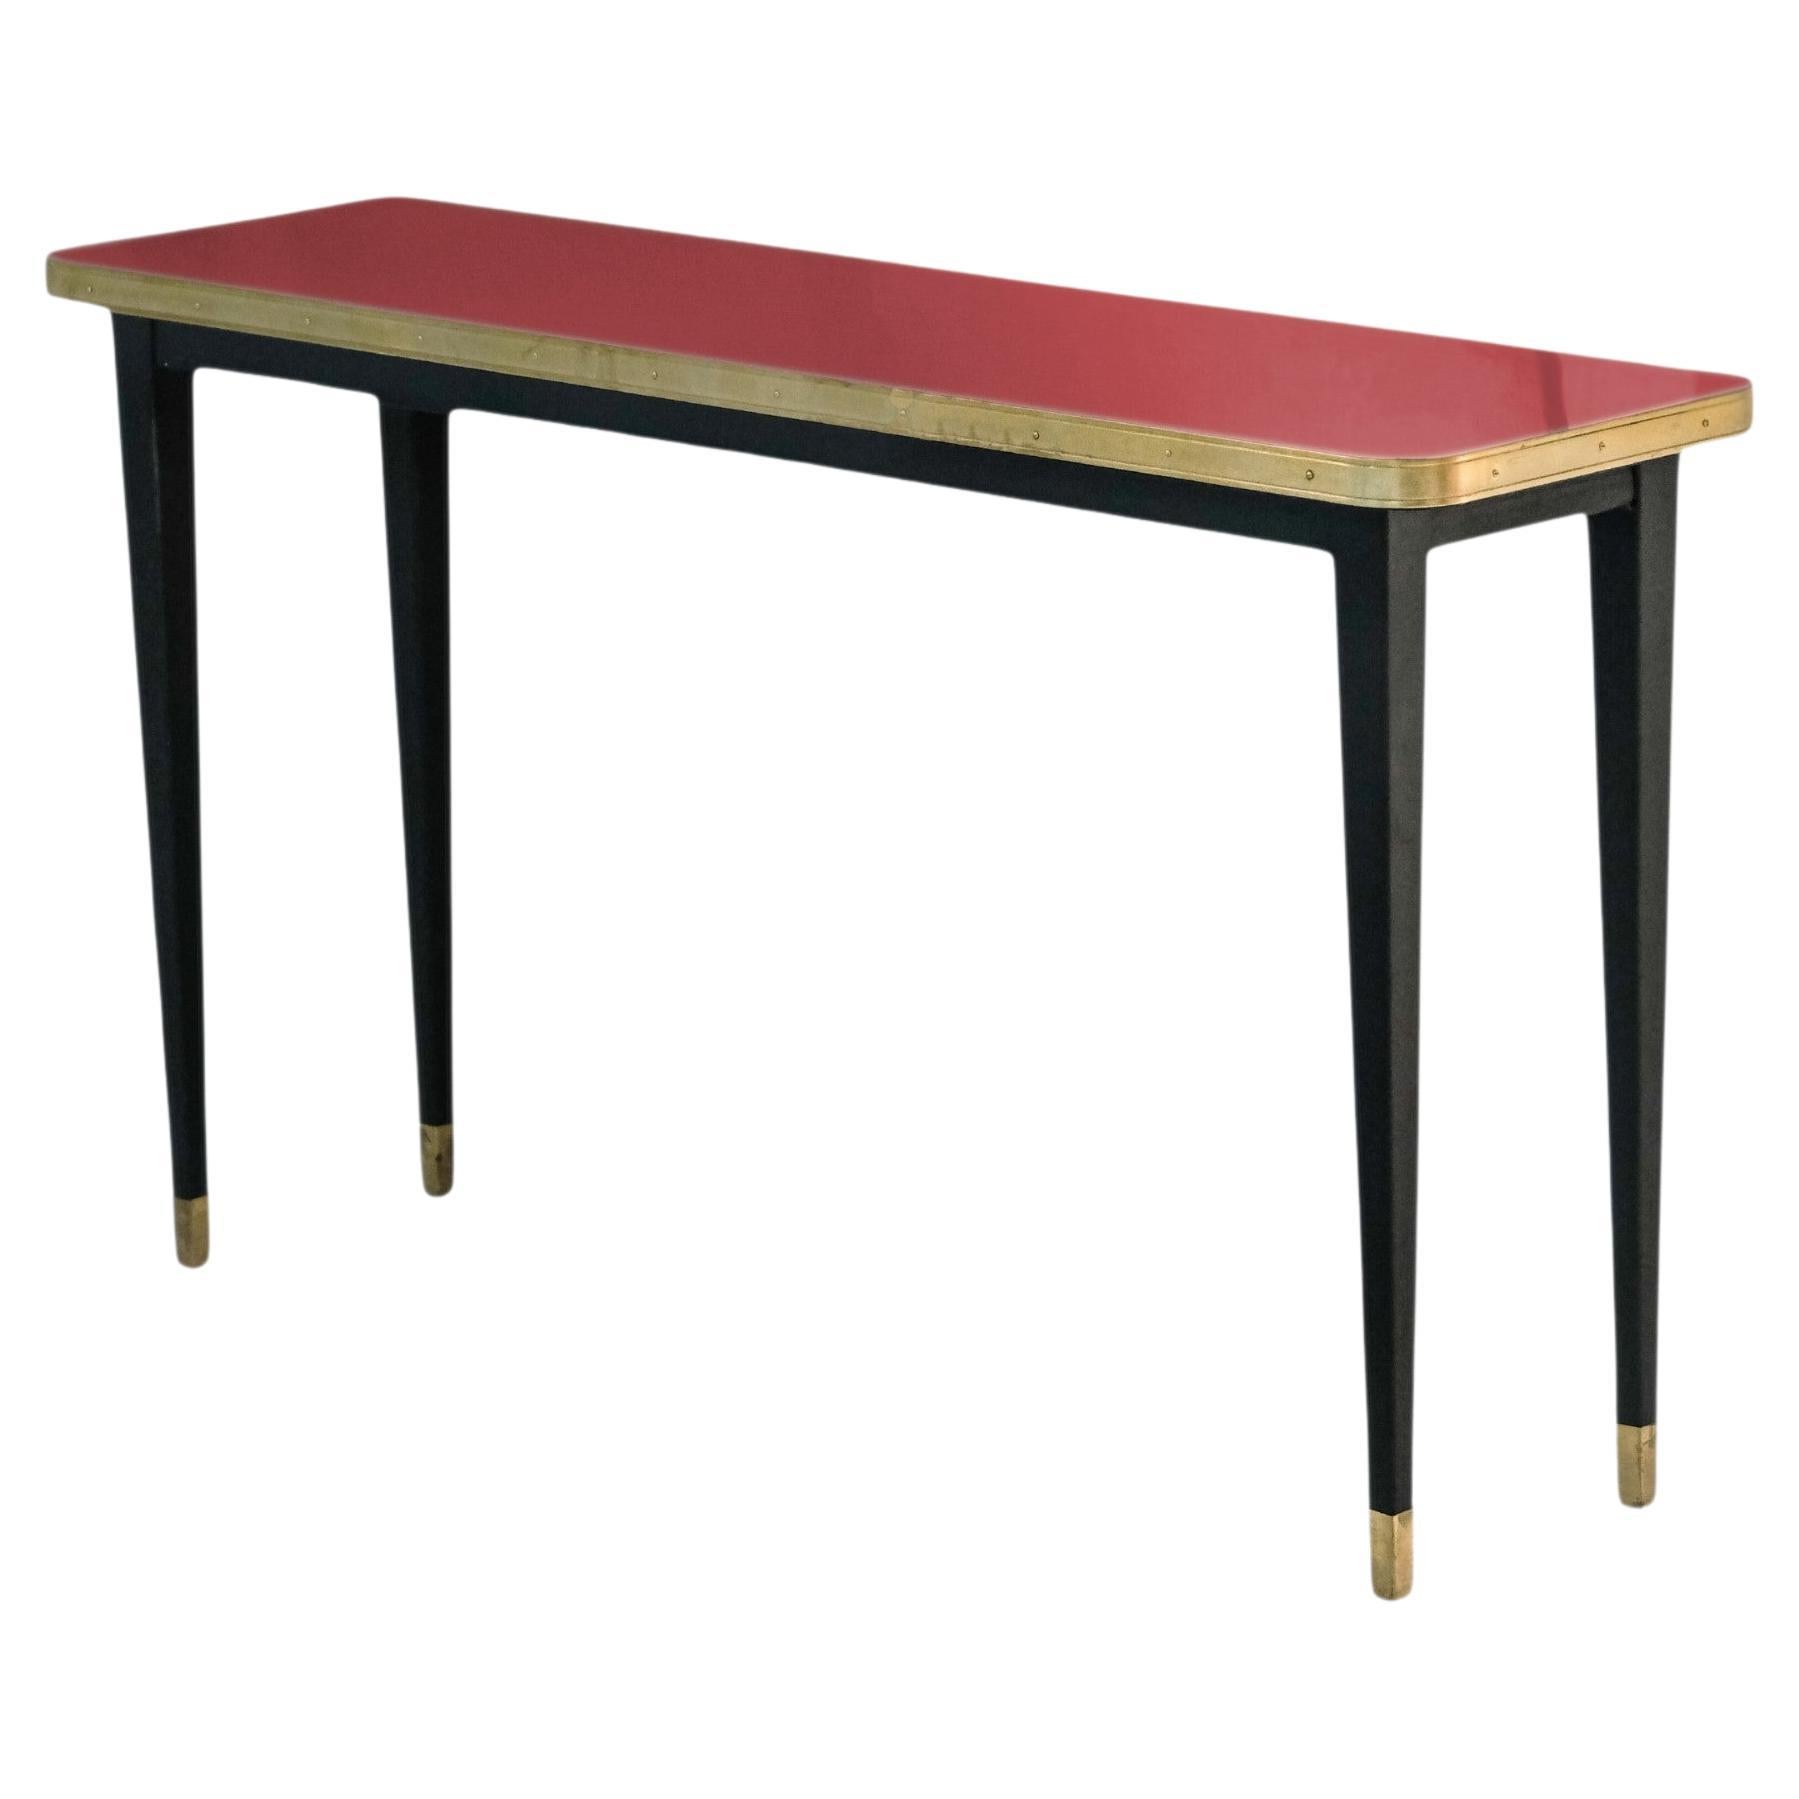 Console Table, High Gloss Laminate & Brass Details, Burgundy - L For Sale